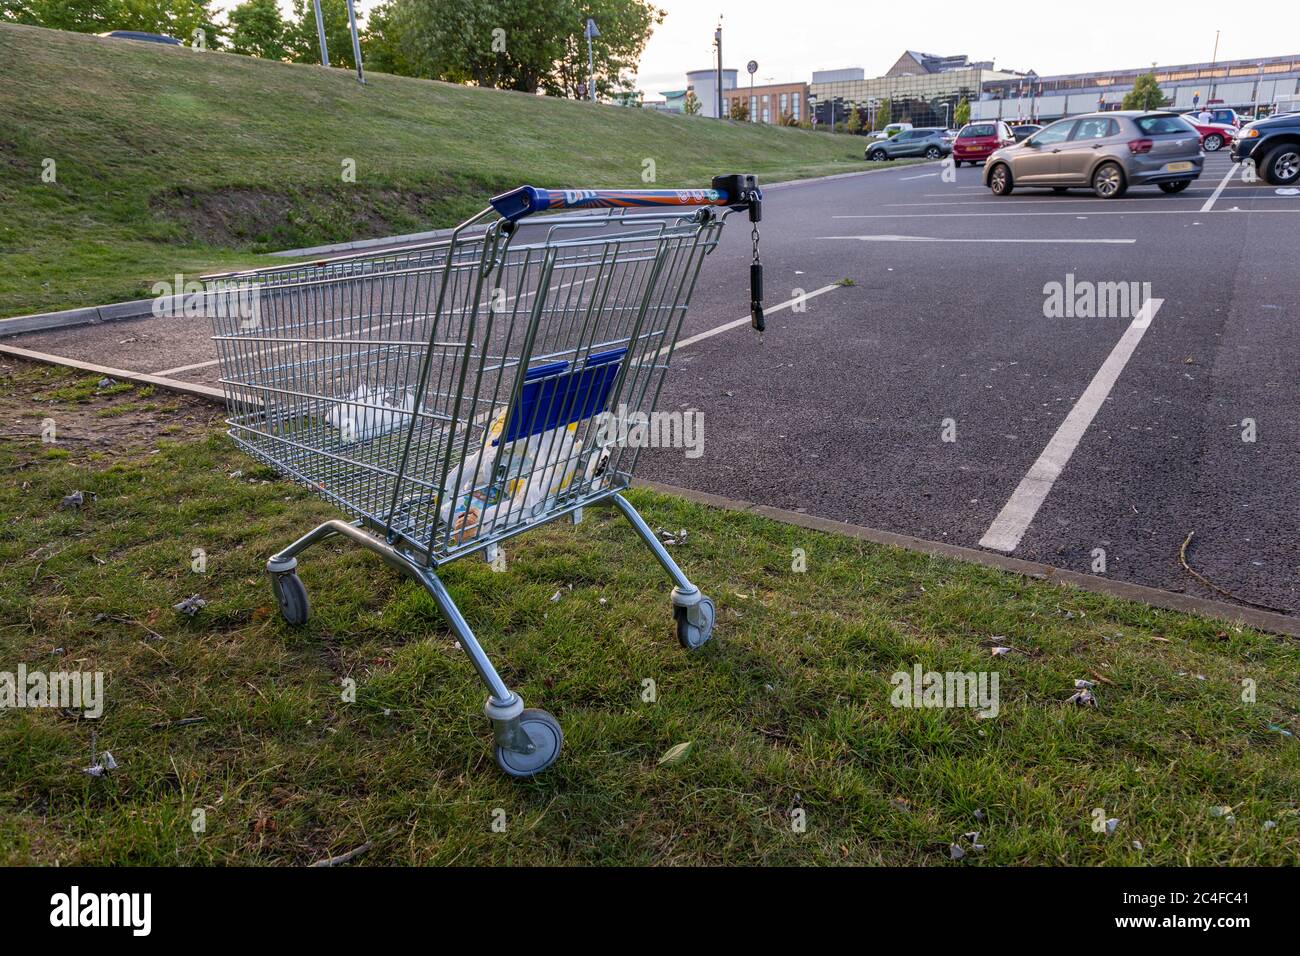 Shopping trolley or cart abandoned on a shopping centre car park UK Stock Photo